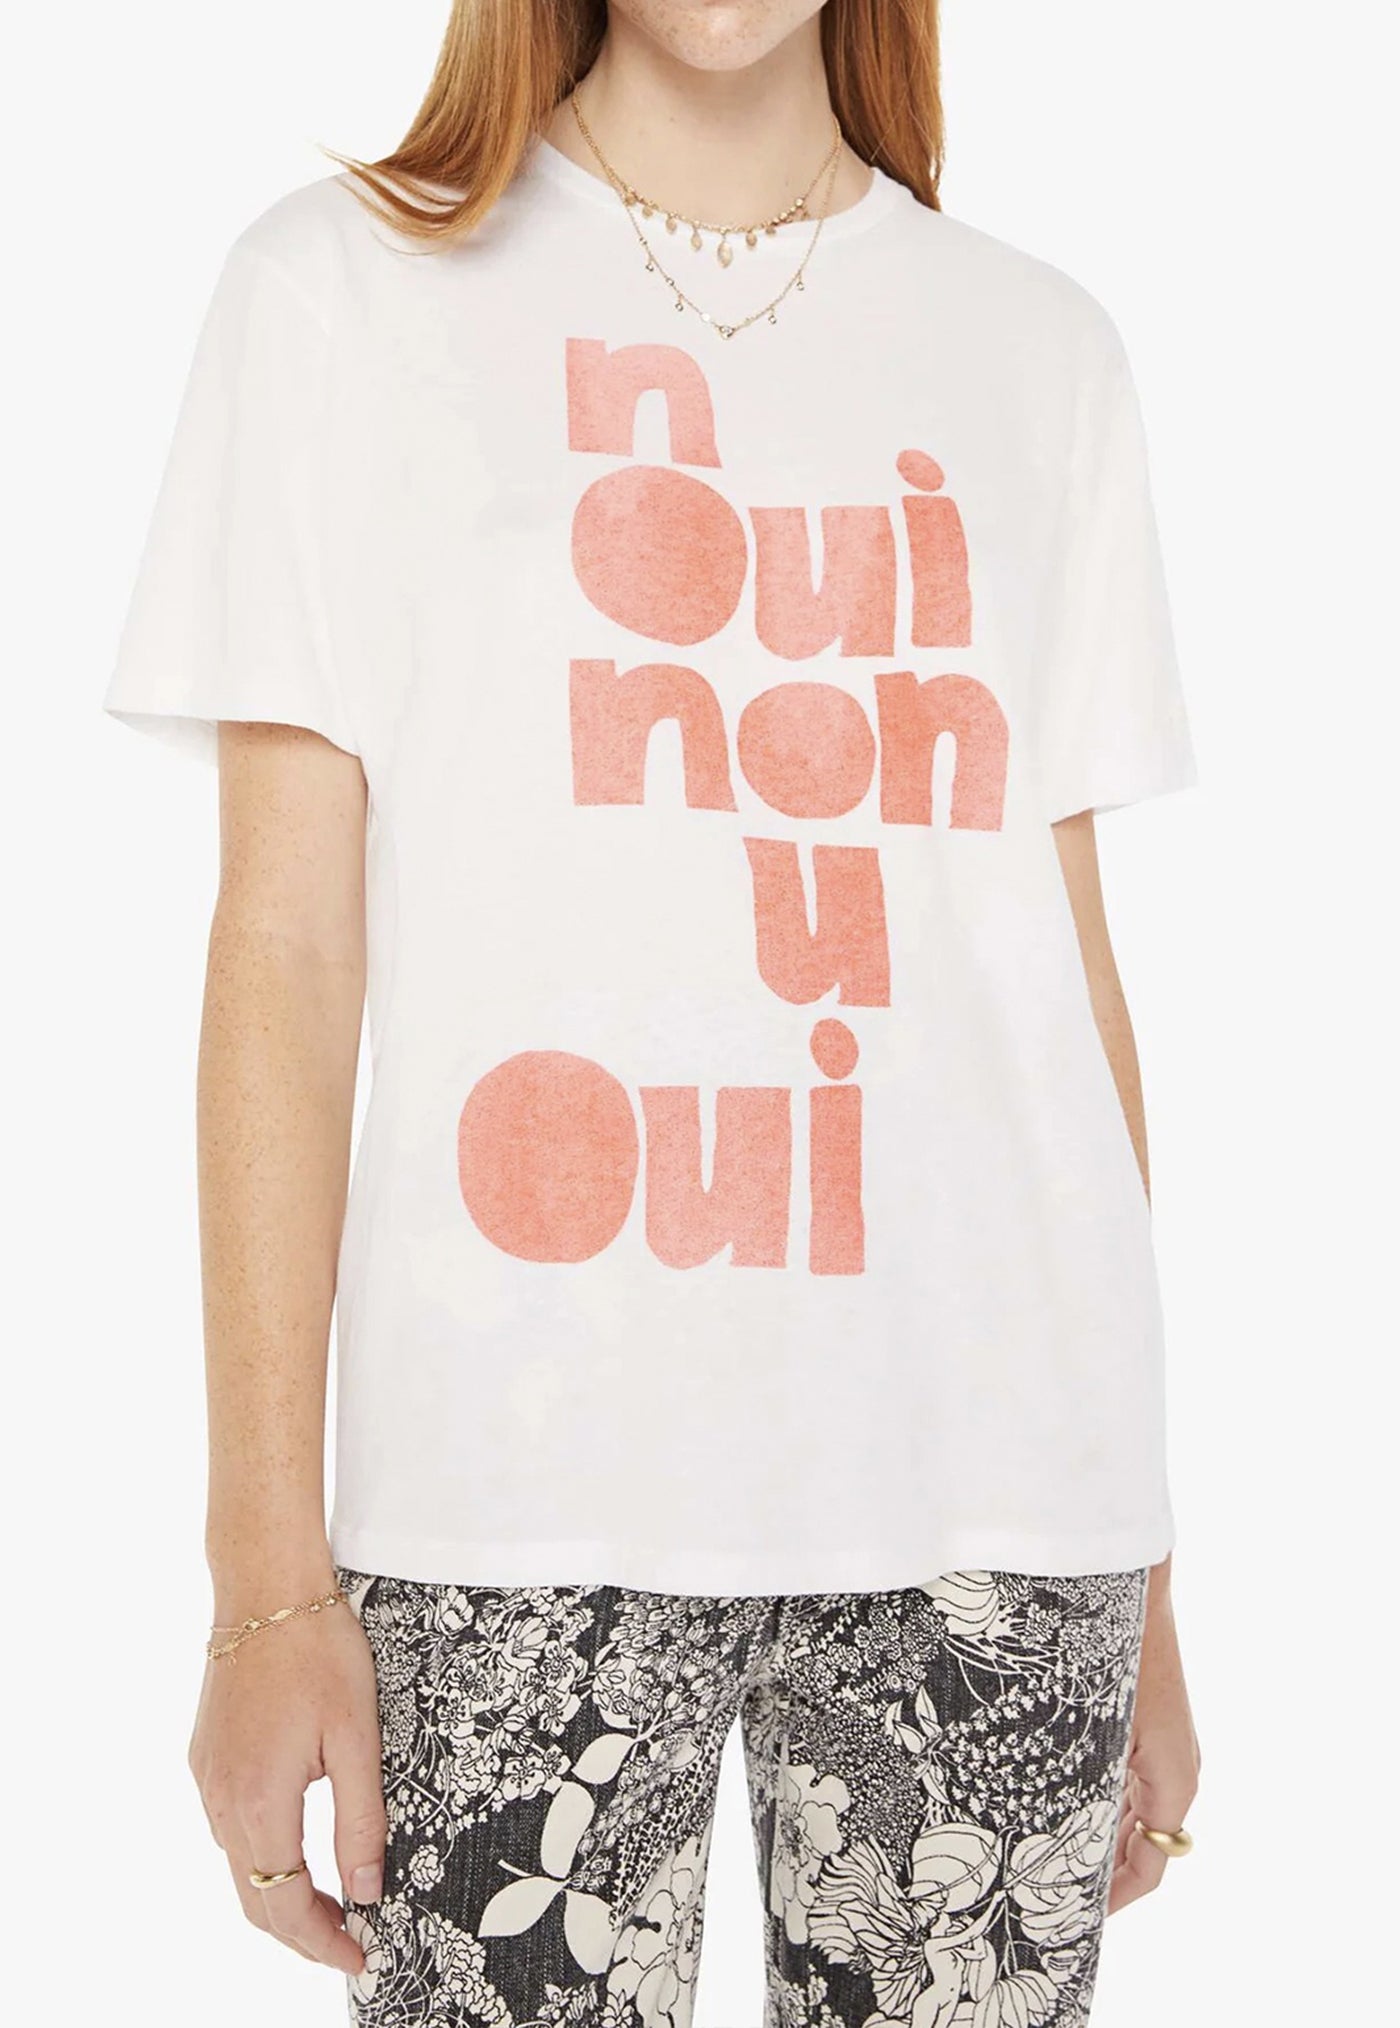 The Rowdy Tee - Oui Non sold by Angel Divine